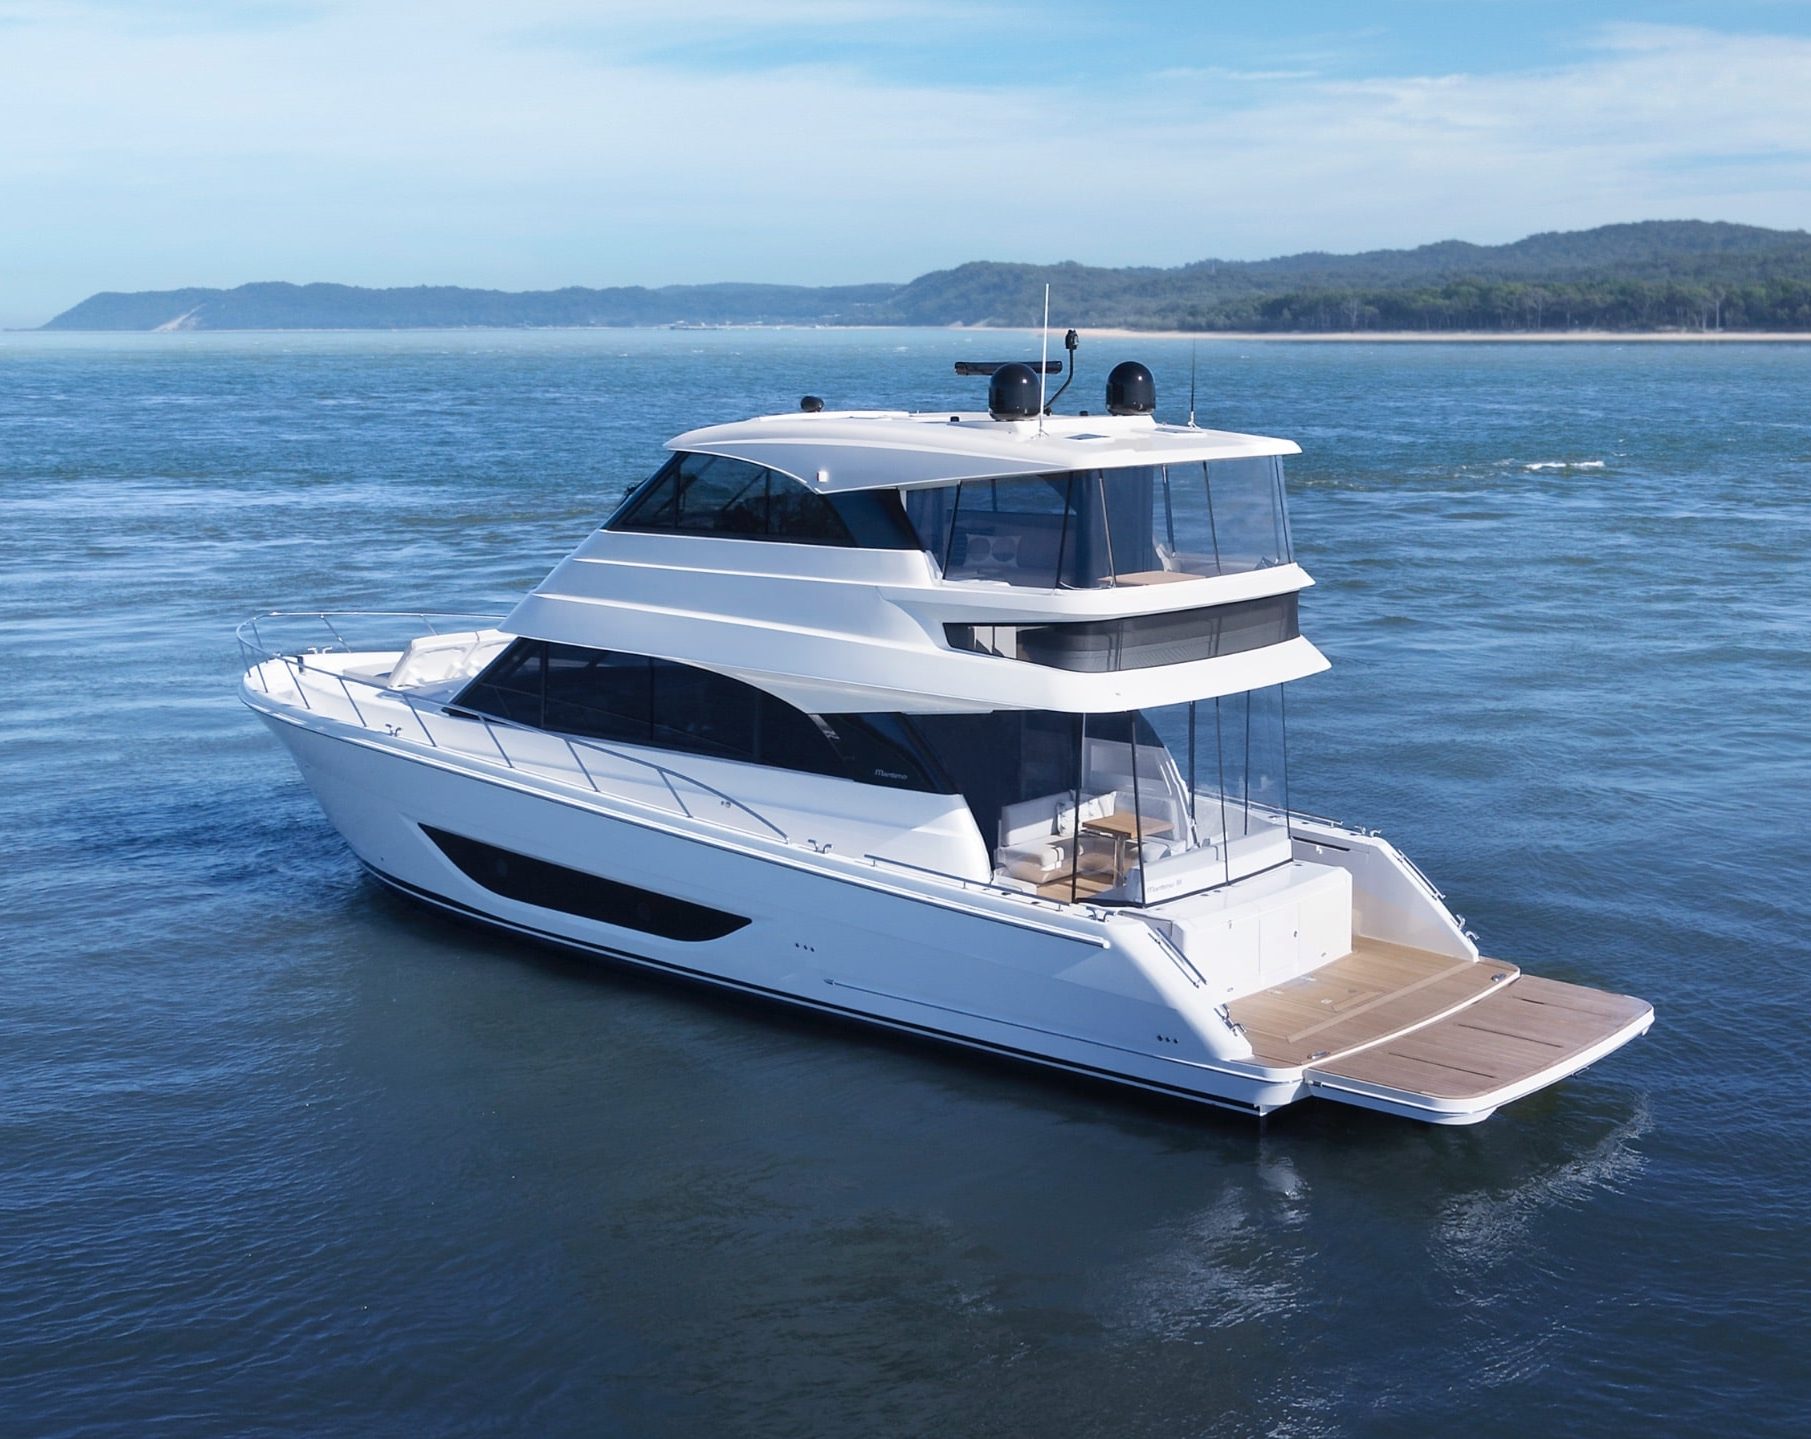 MOMENTUM BUILDING FOR MARITIMO’S NEW MODEL ROLL – OUT IN THE UNITED STATES